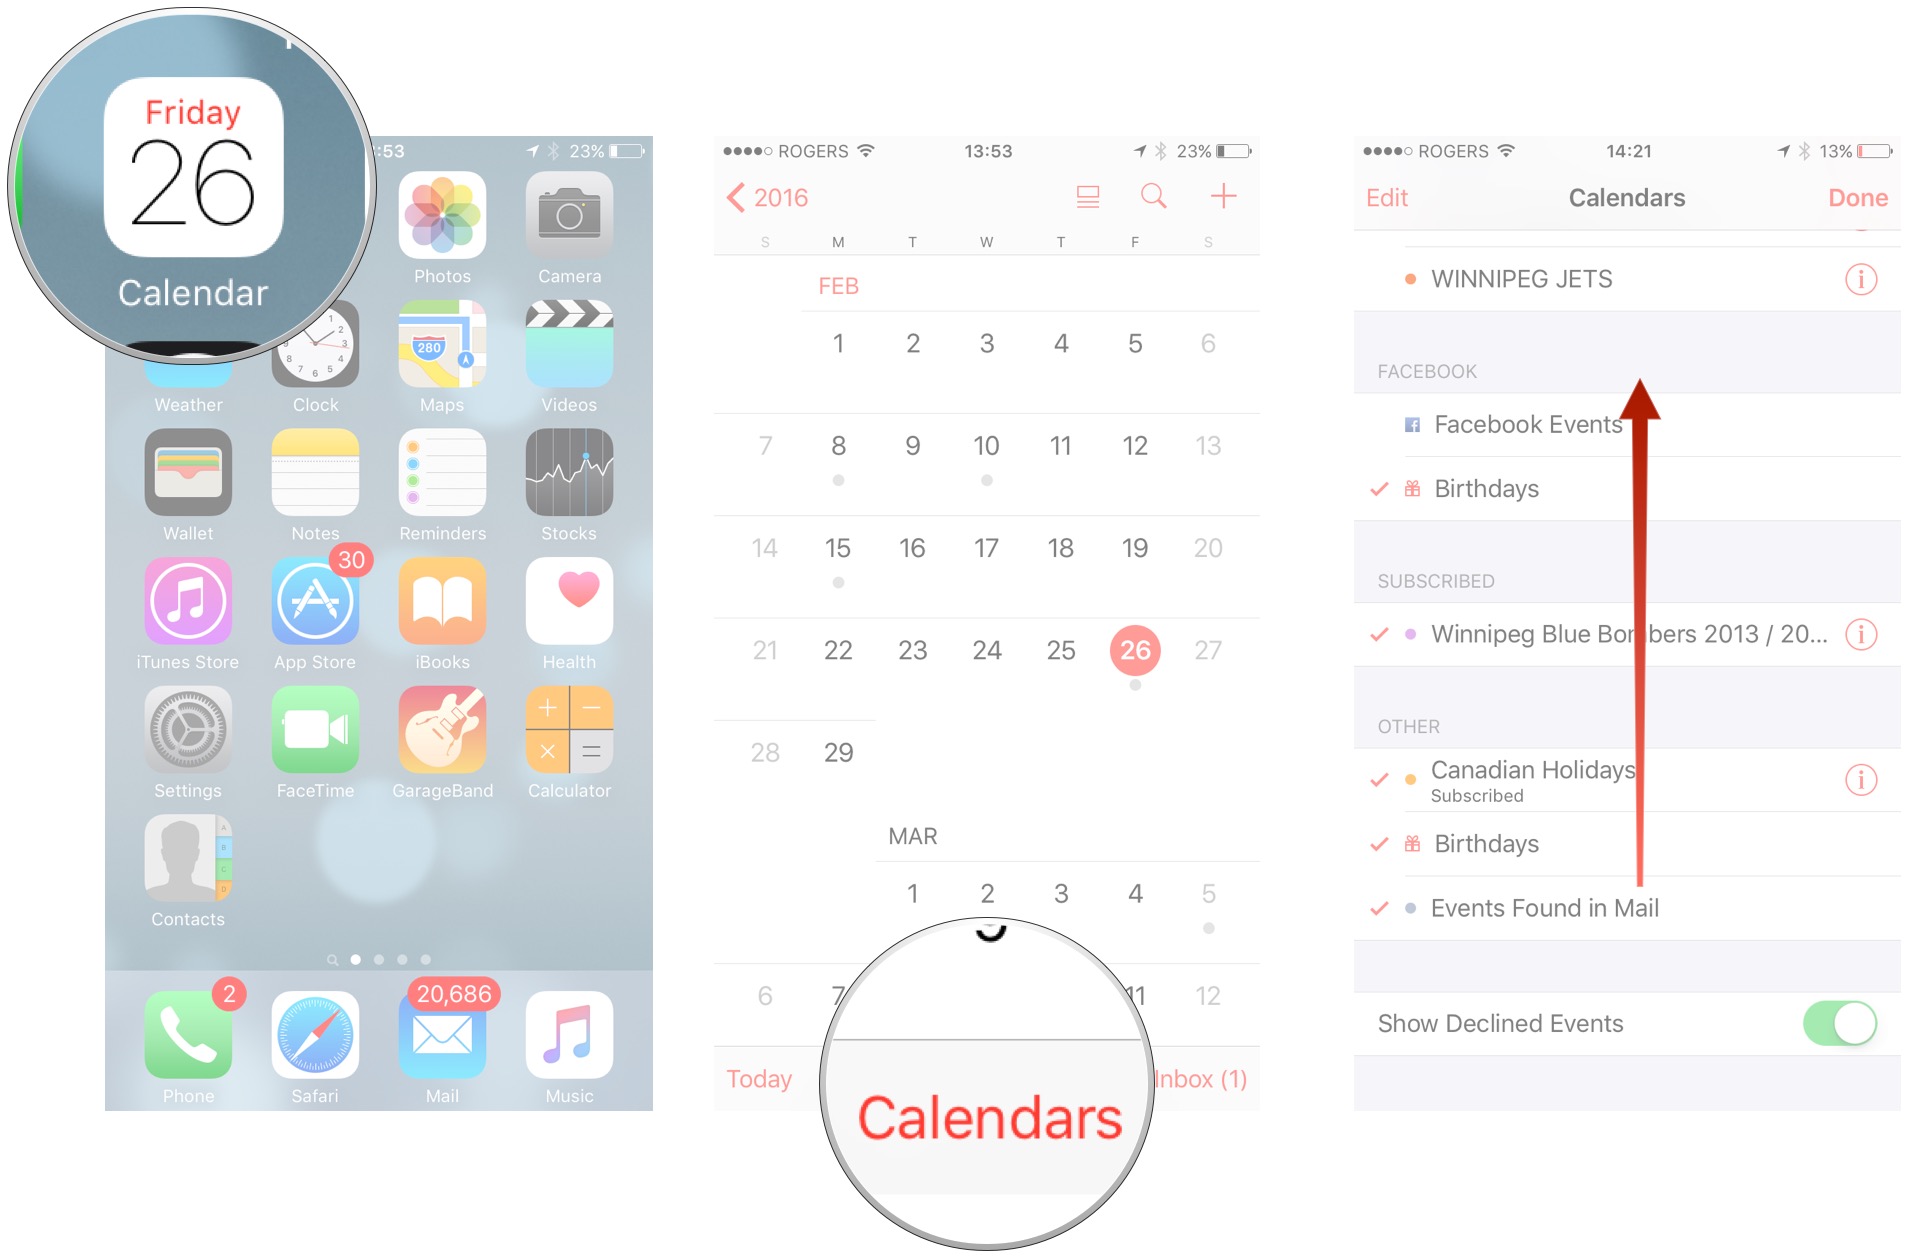 Open calendar, then tap calendars, then swipe up to scroll down to the bottom